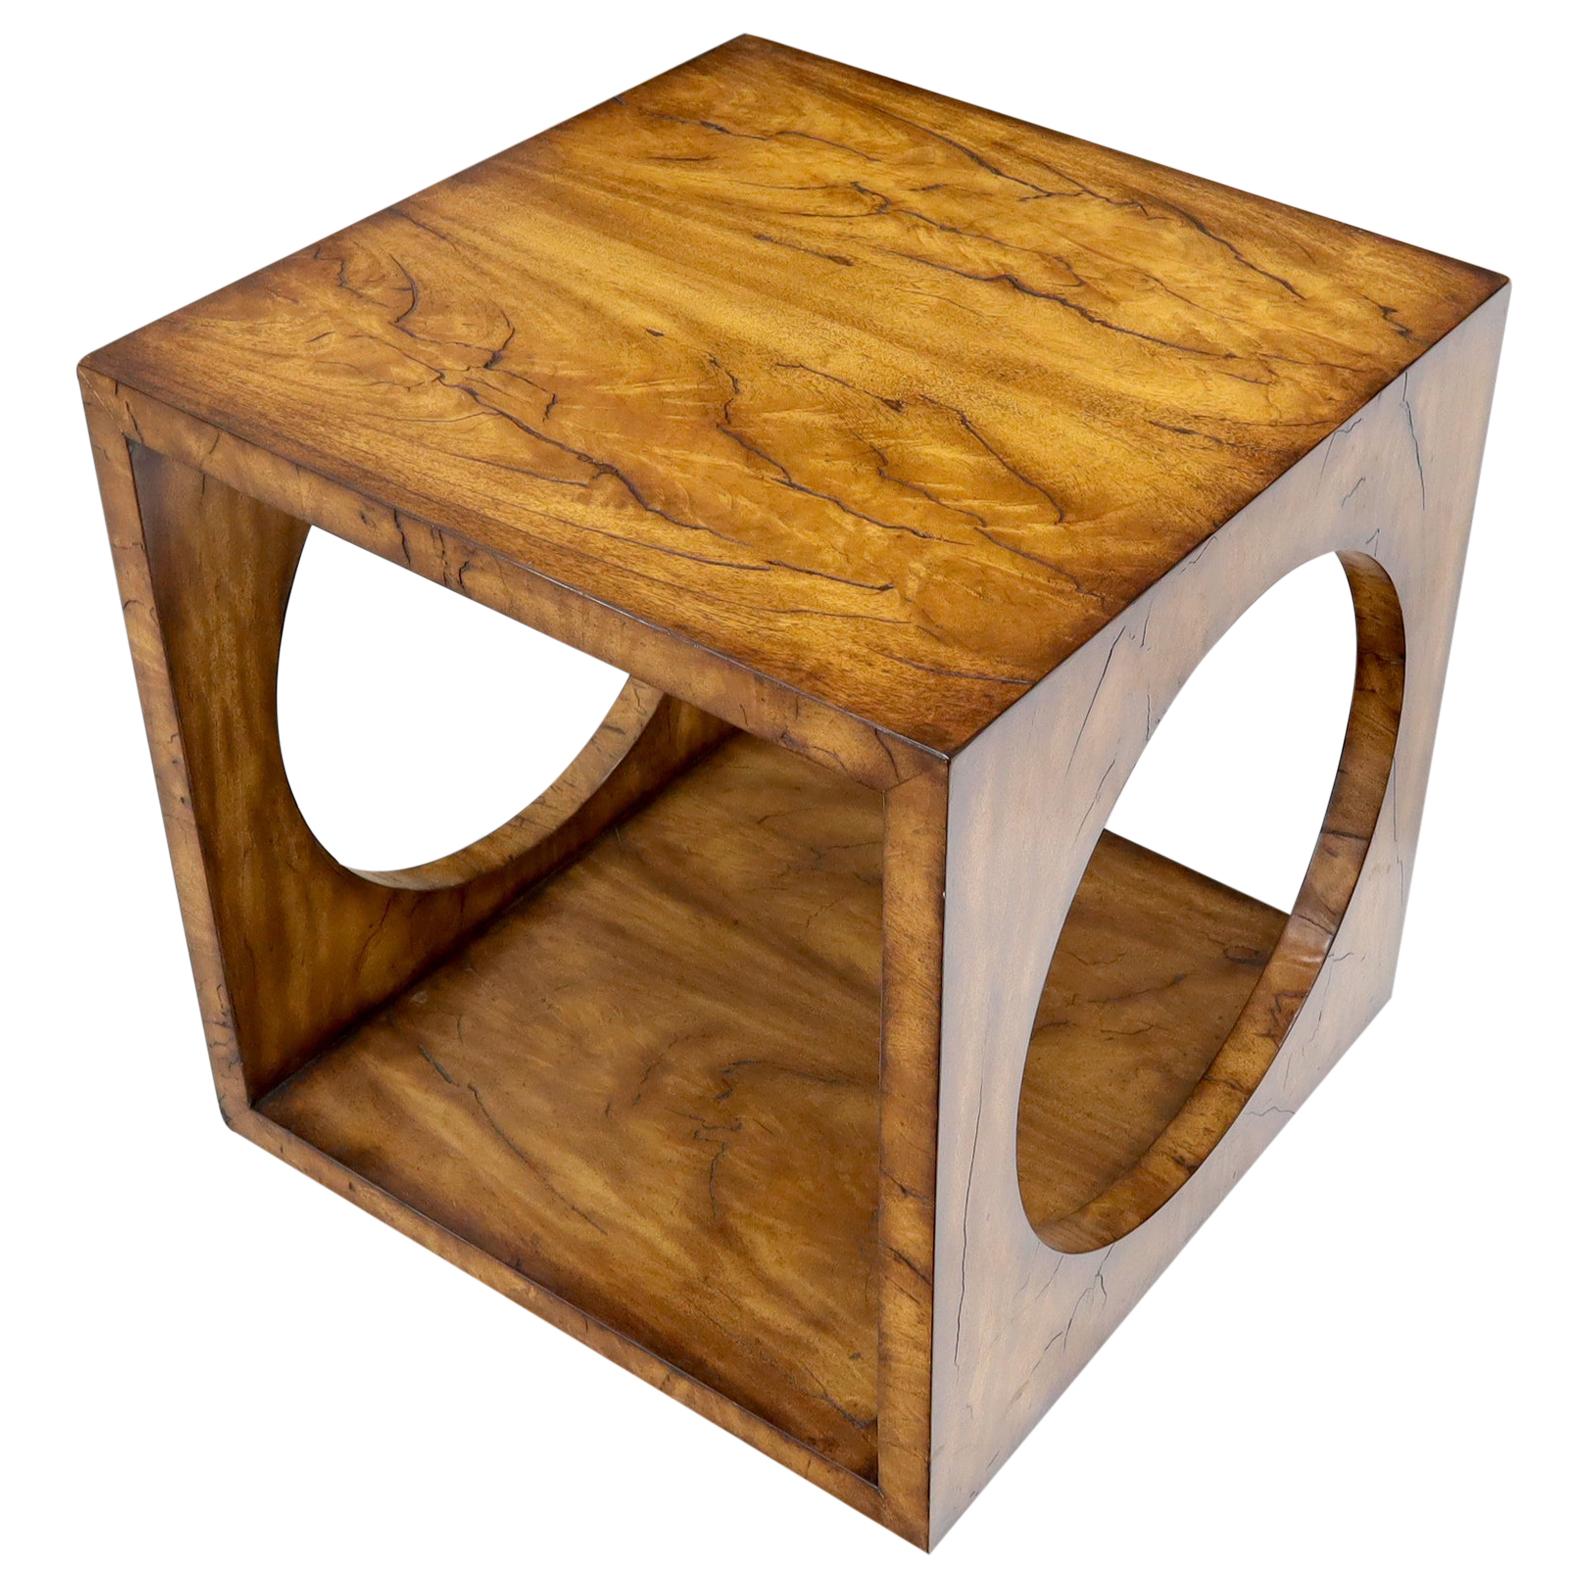 Details about   Mid Century Style Hand Carved Cube Design Bedside Side Table Solid Wood RUSTIC 